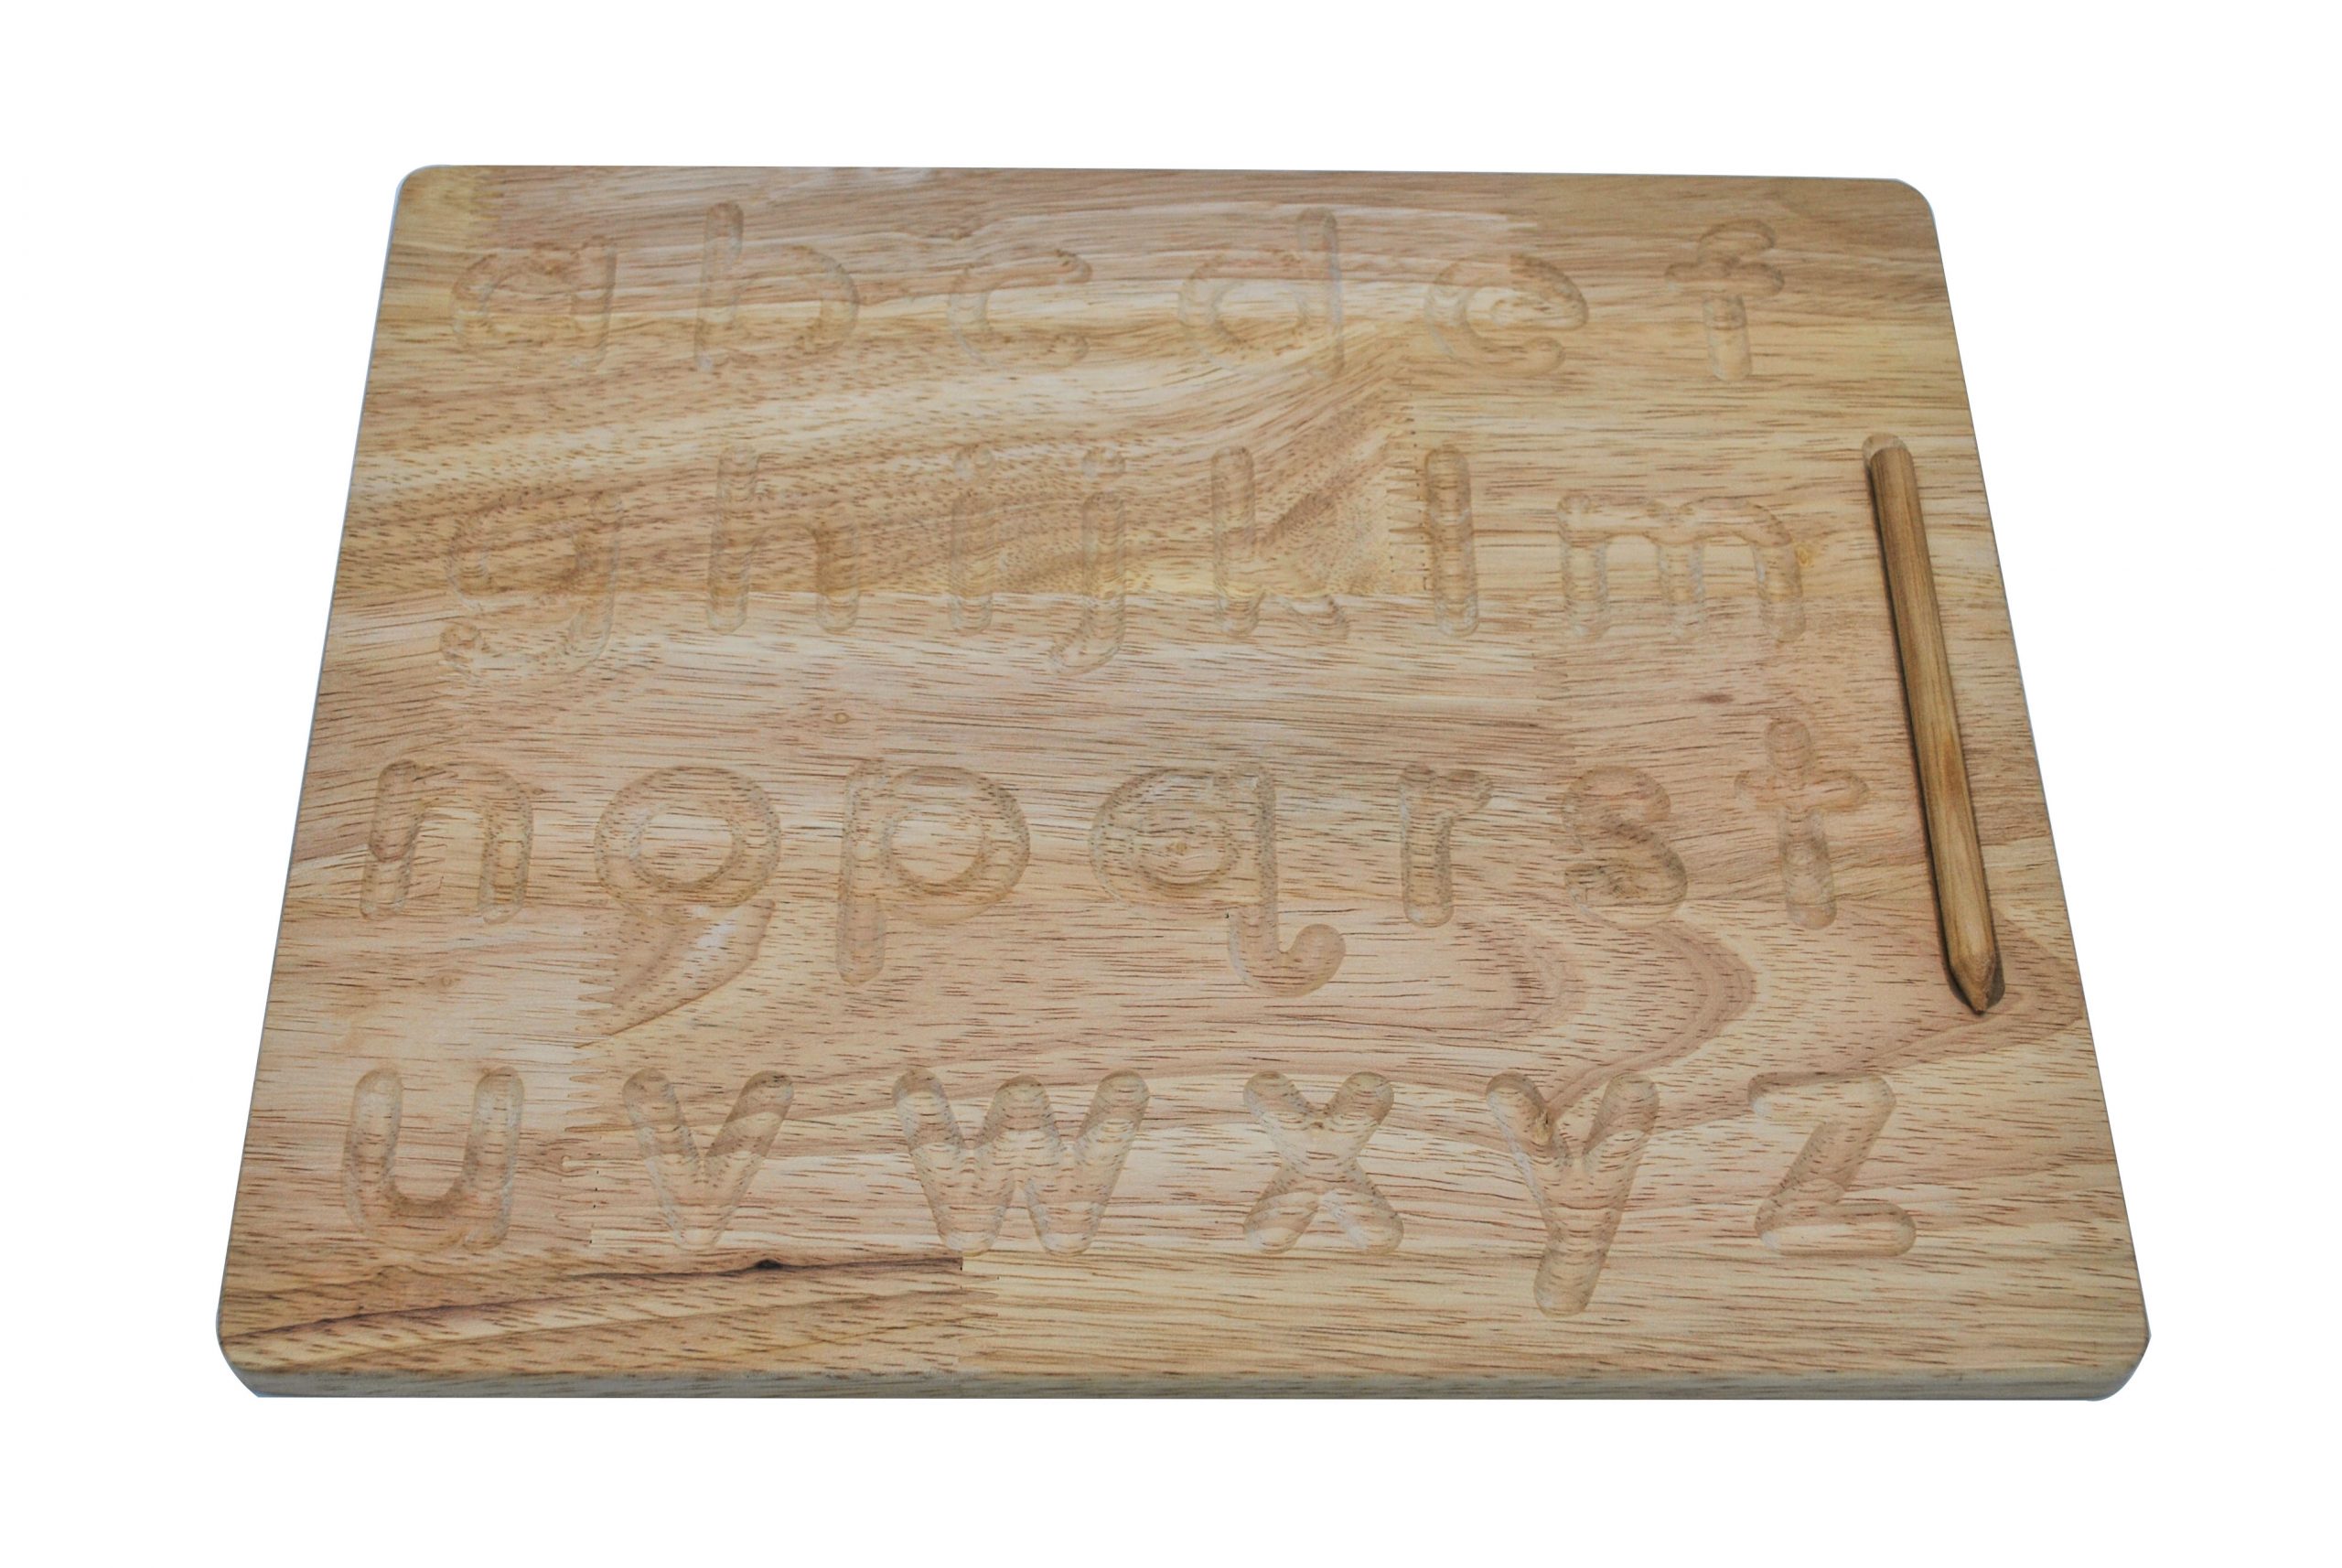 Lowercase Letter Wooden Writing Board